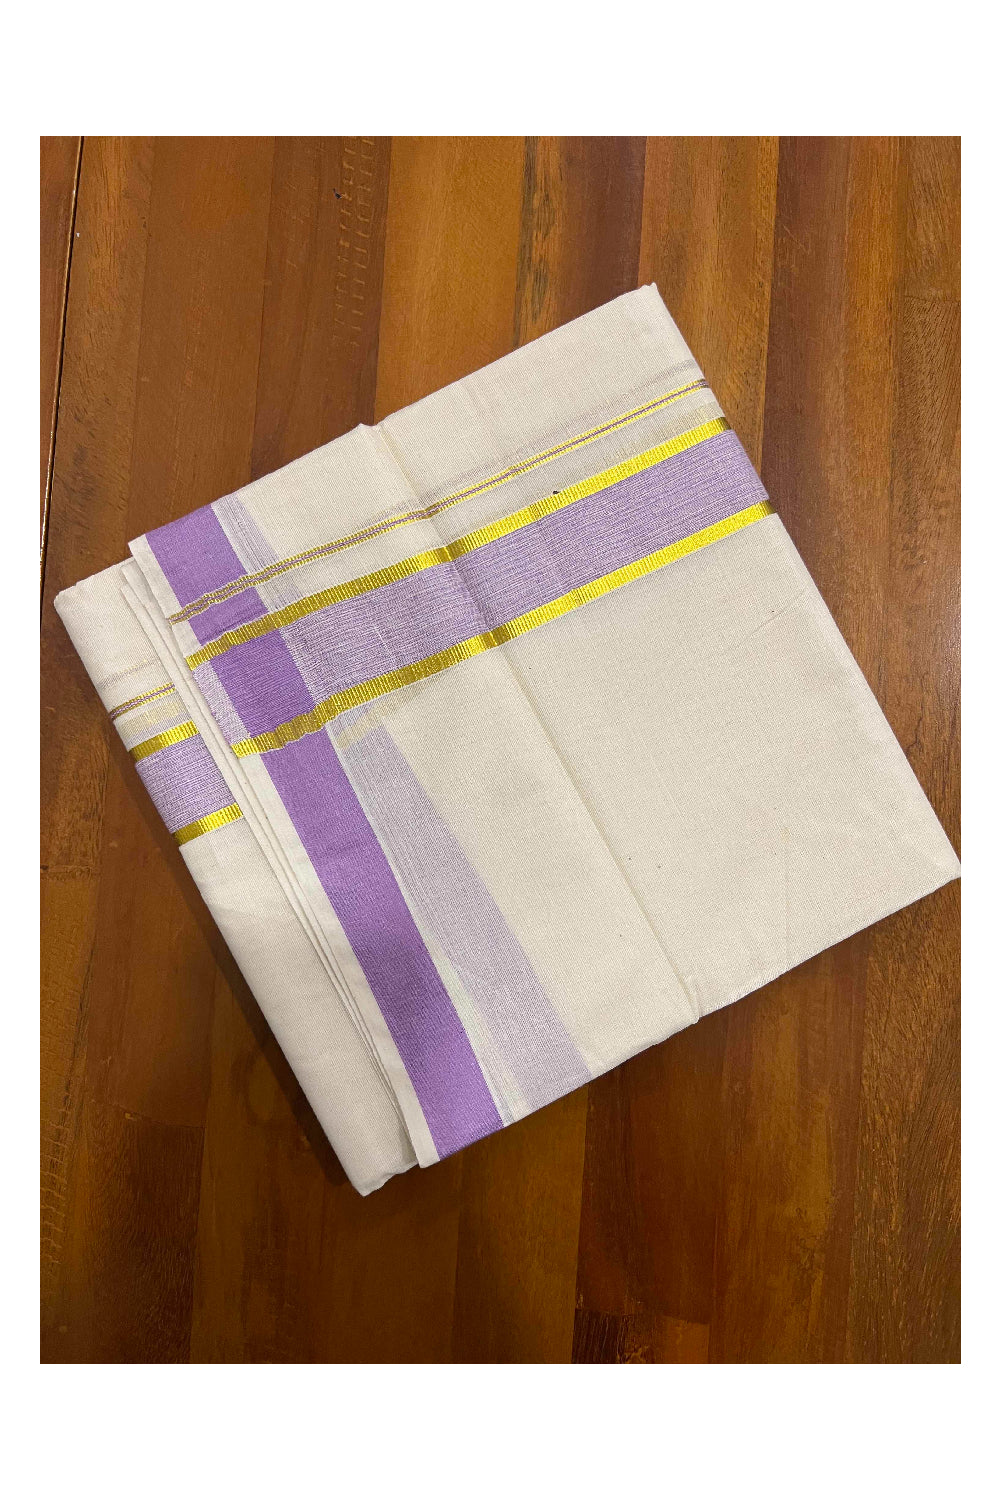 Off White Kerala Double Mundu with Kasavu and Violet Border (South Indian Dhoti)